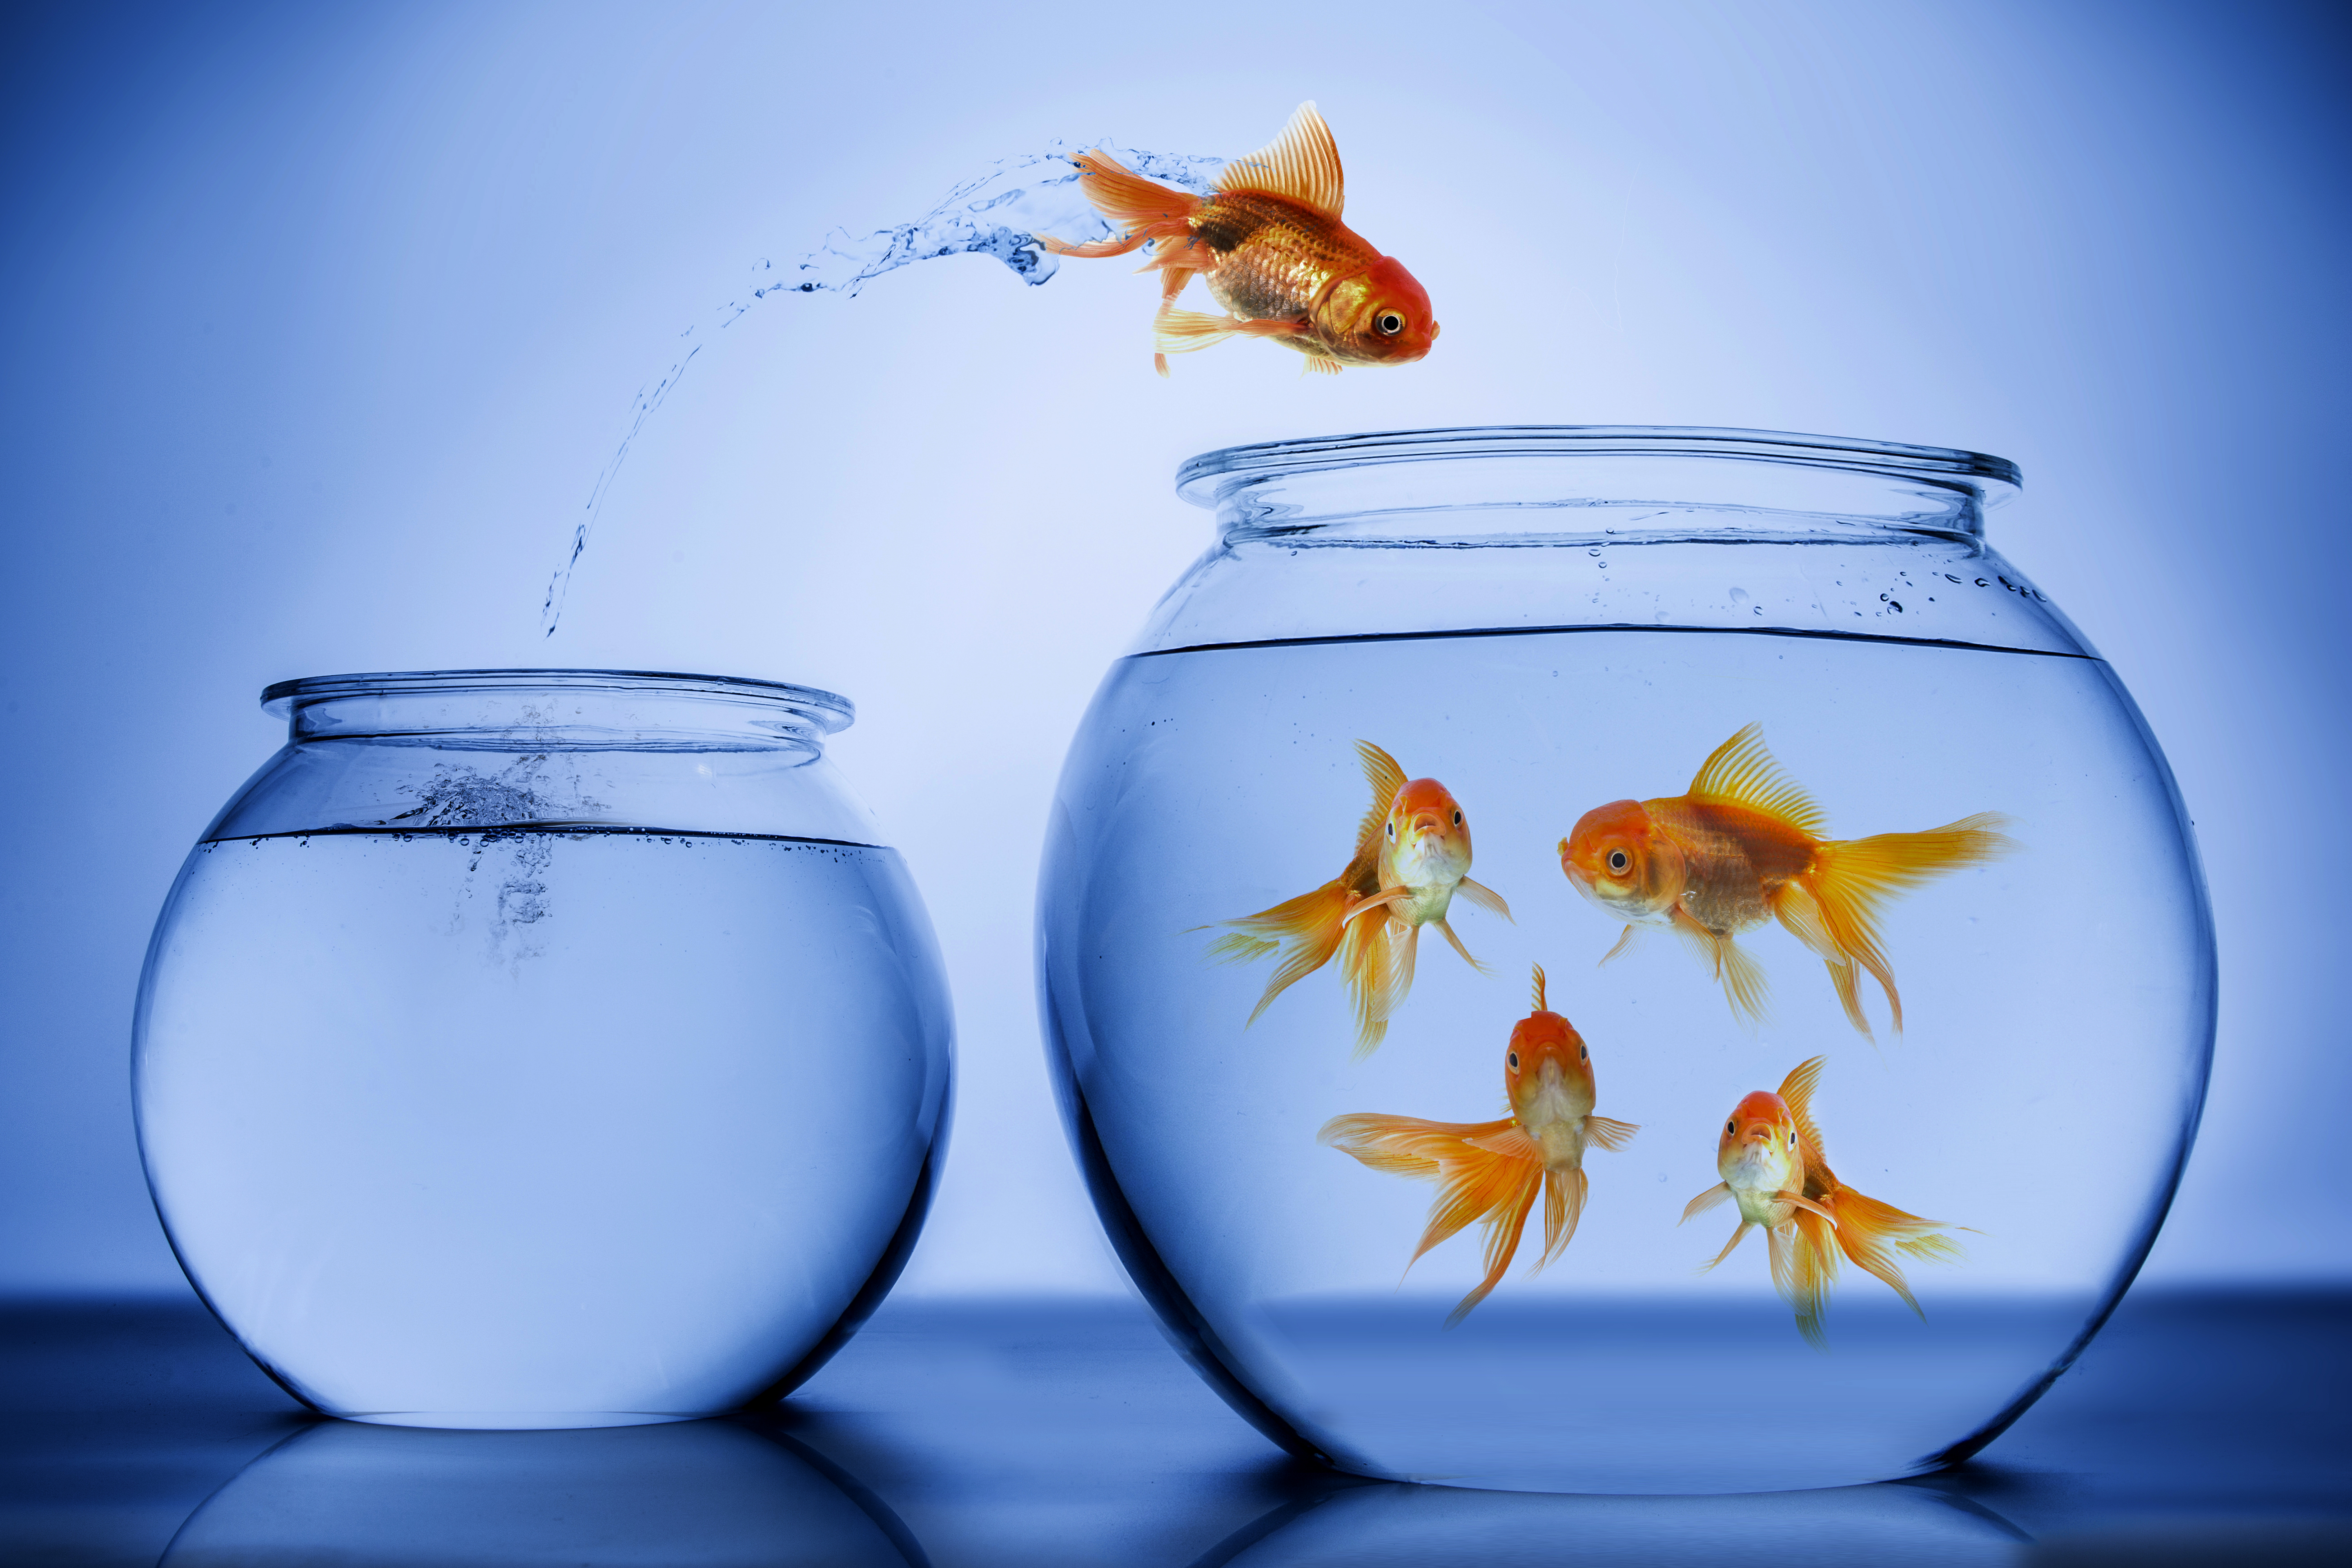 Fish happily jumping into a fishbowl with small and large fish